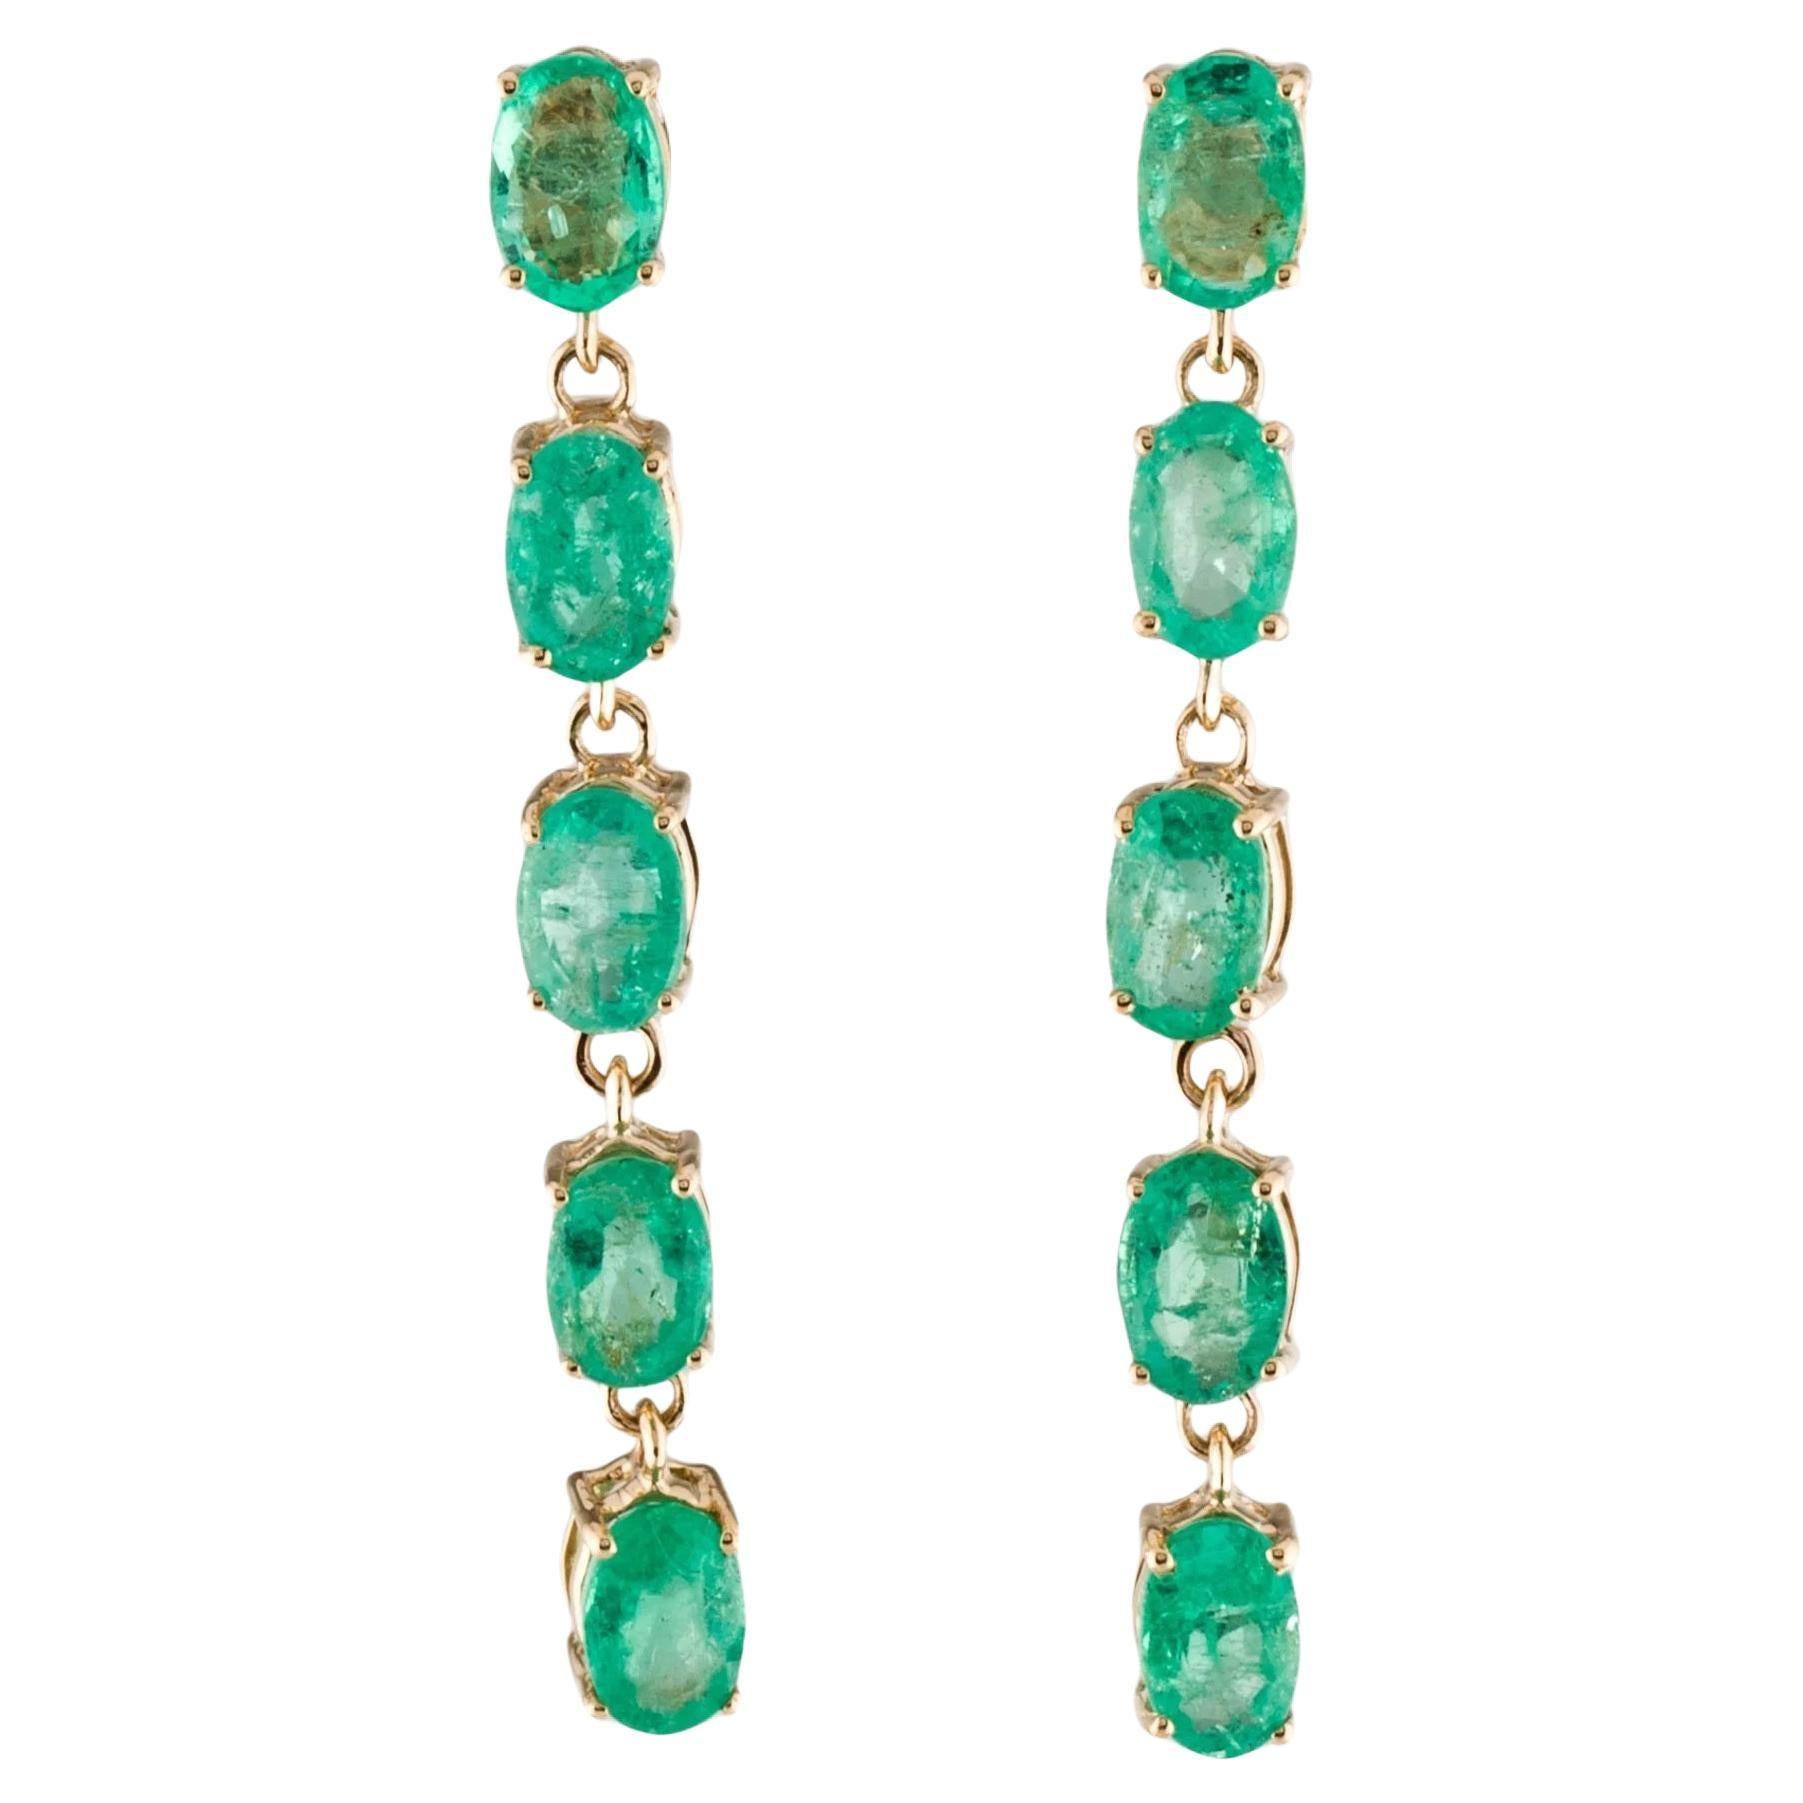 14K Gold Earrings with 5.08 Ct Oval Emeralds - Luxurious & Elegant For Sale